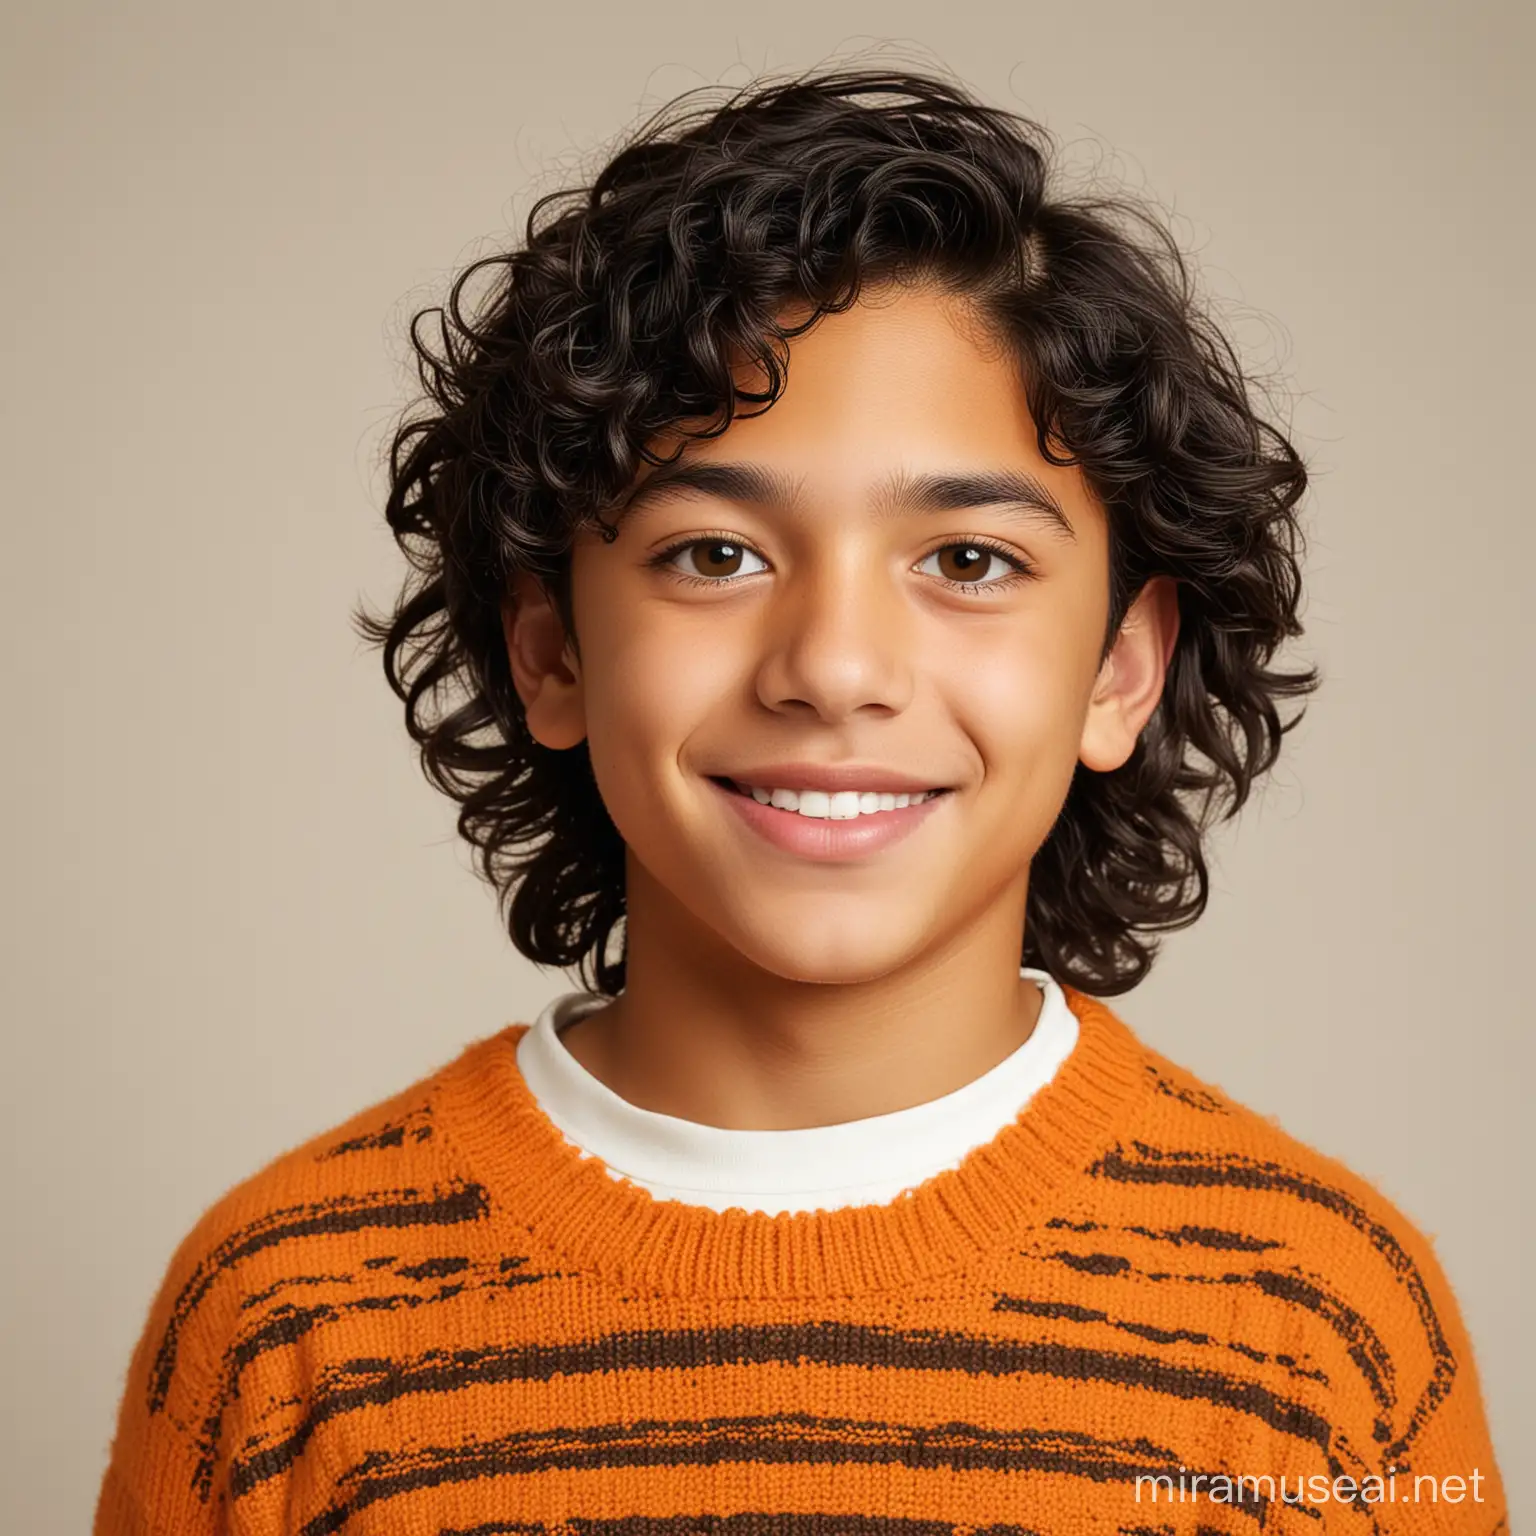 a Hawaiian 13 year old boy with wavy black hair and brown eyes who wears an orange sweater with a white background